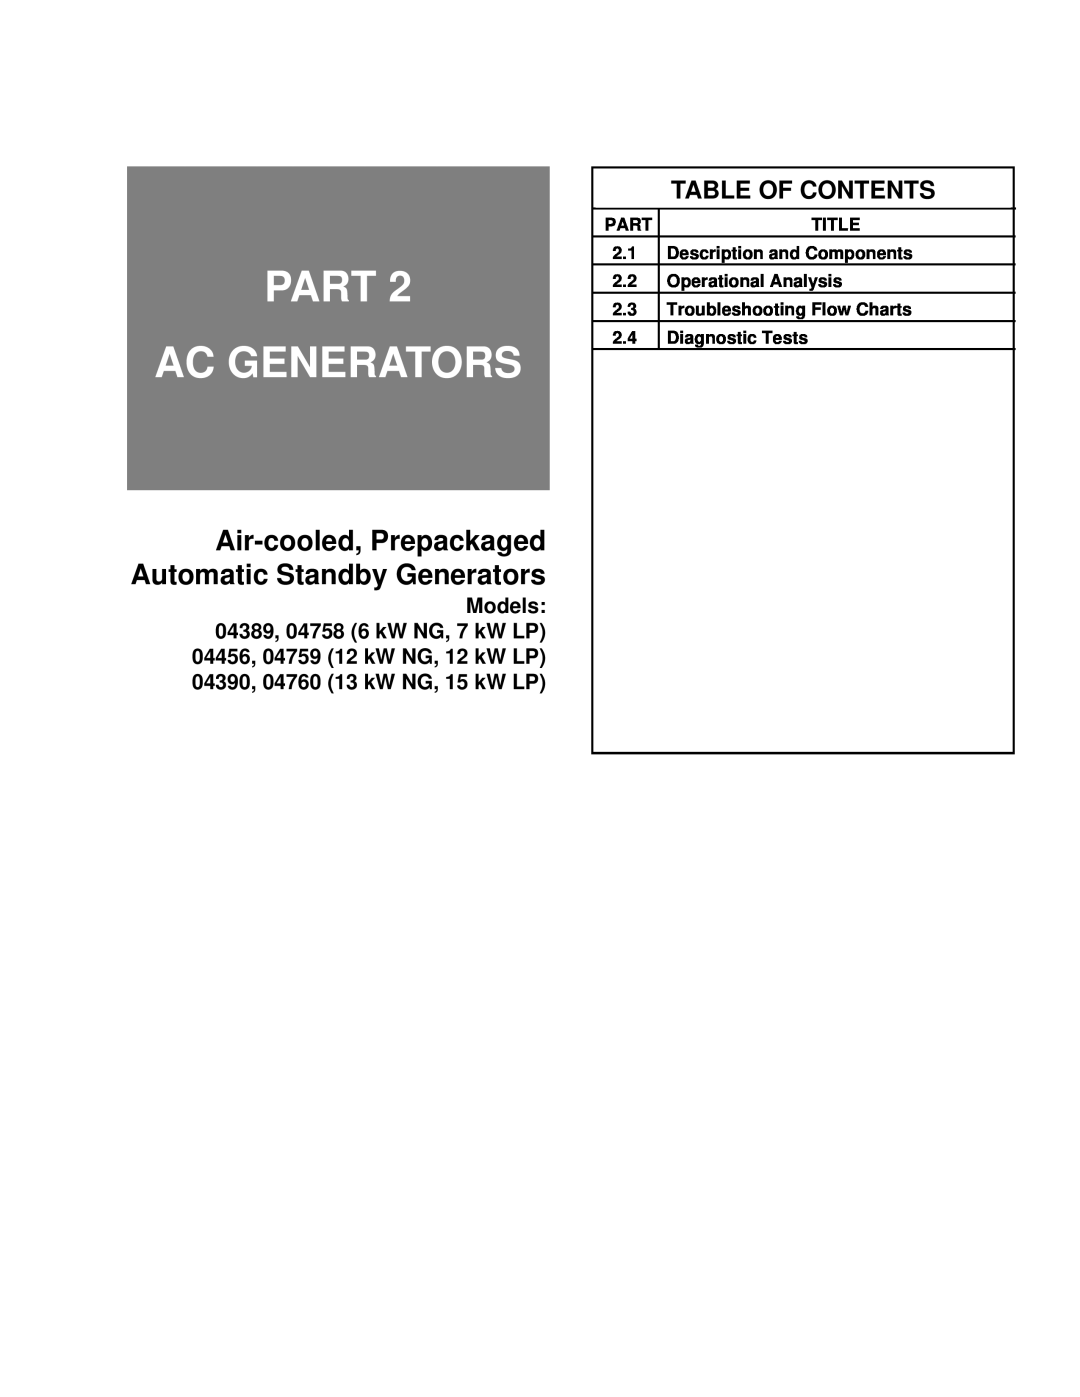 Guardian Technologies 4389 Part Ac Generators, Air-cooled, Prepackaged Automatic Standby Generators, Table Of Contents 